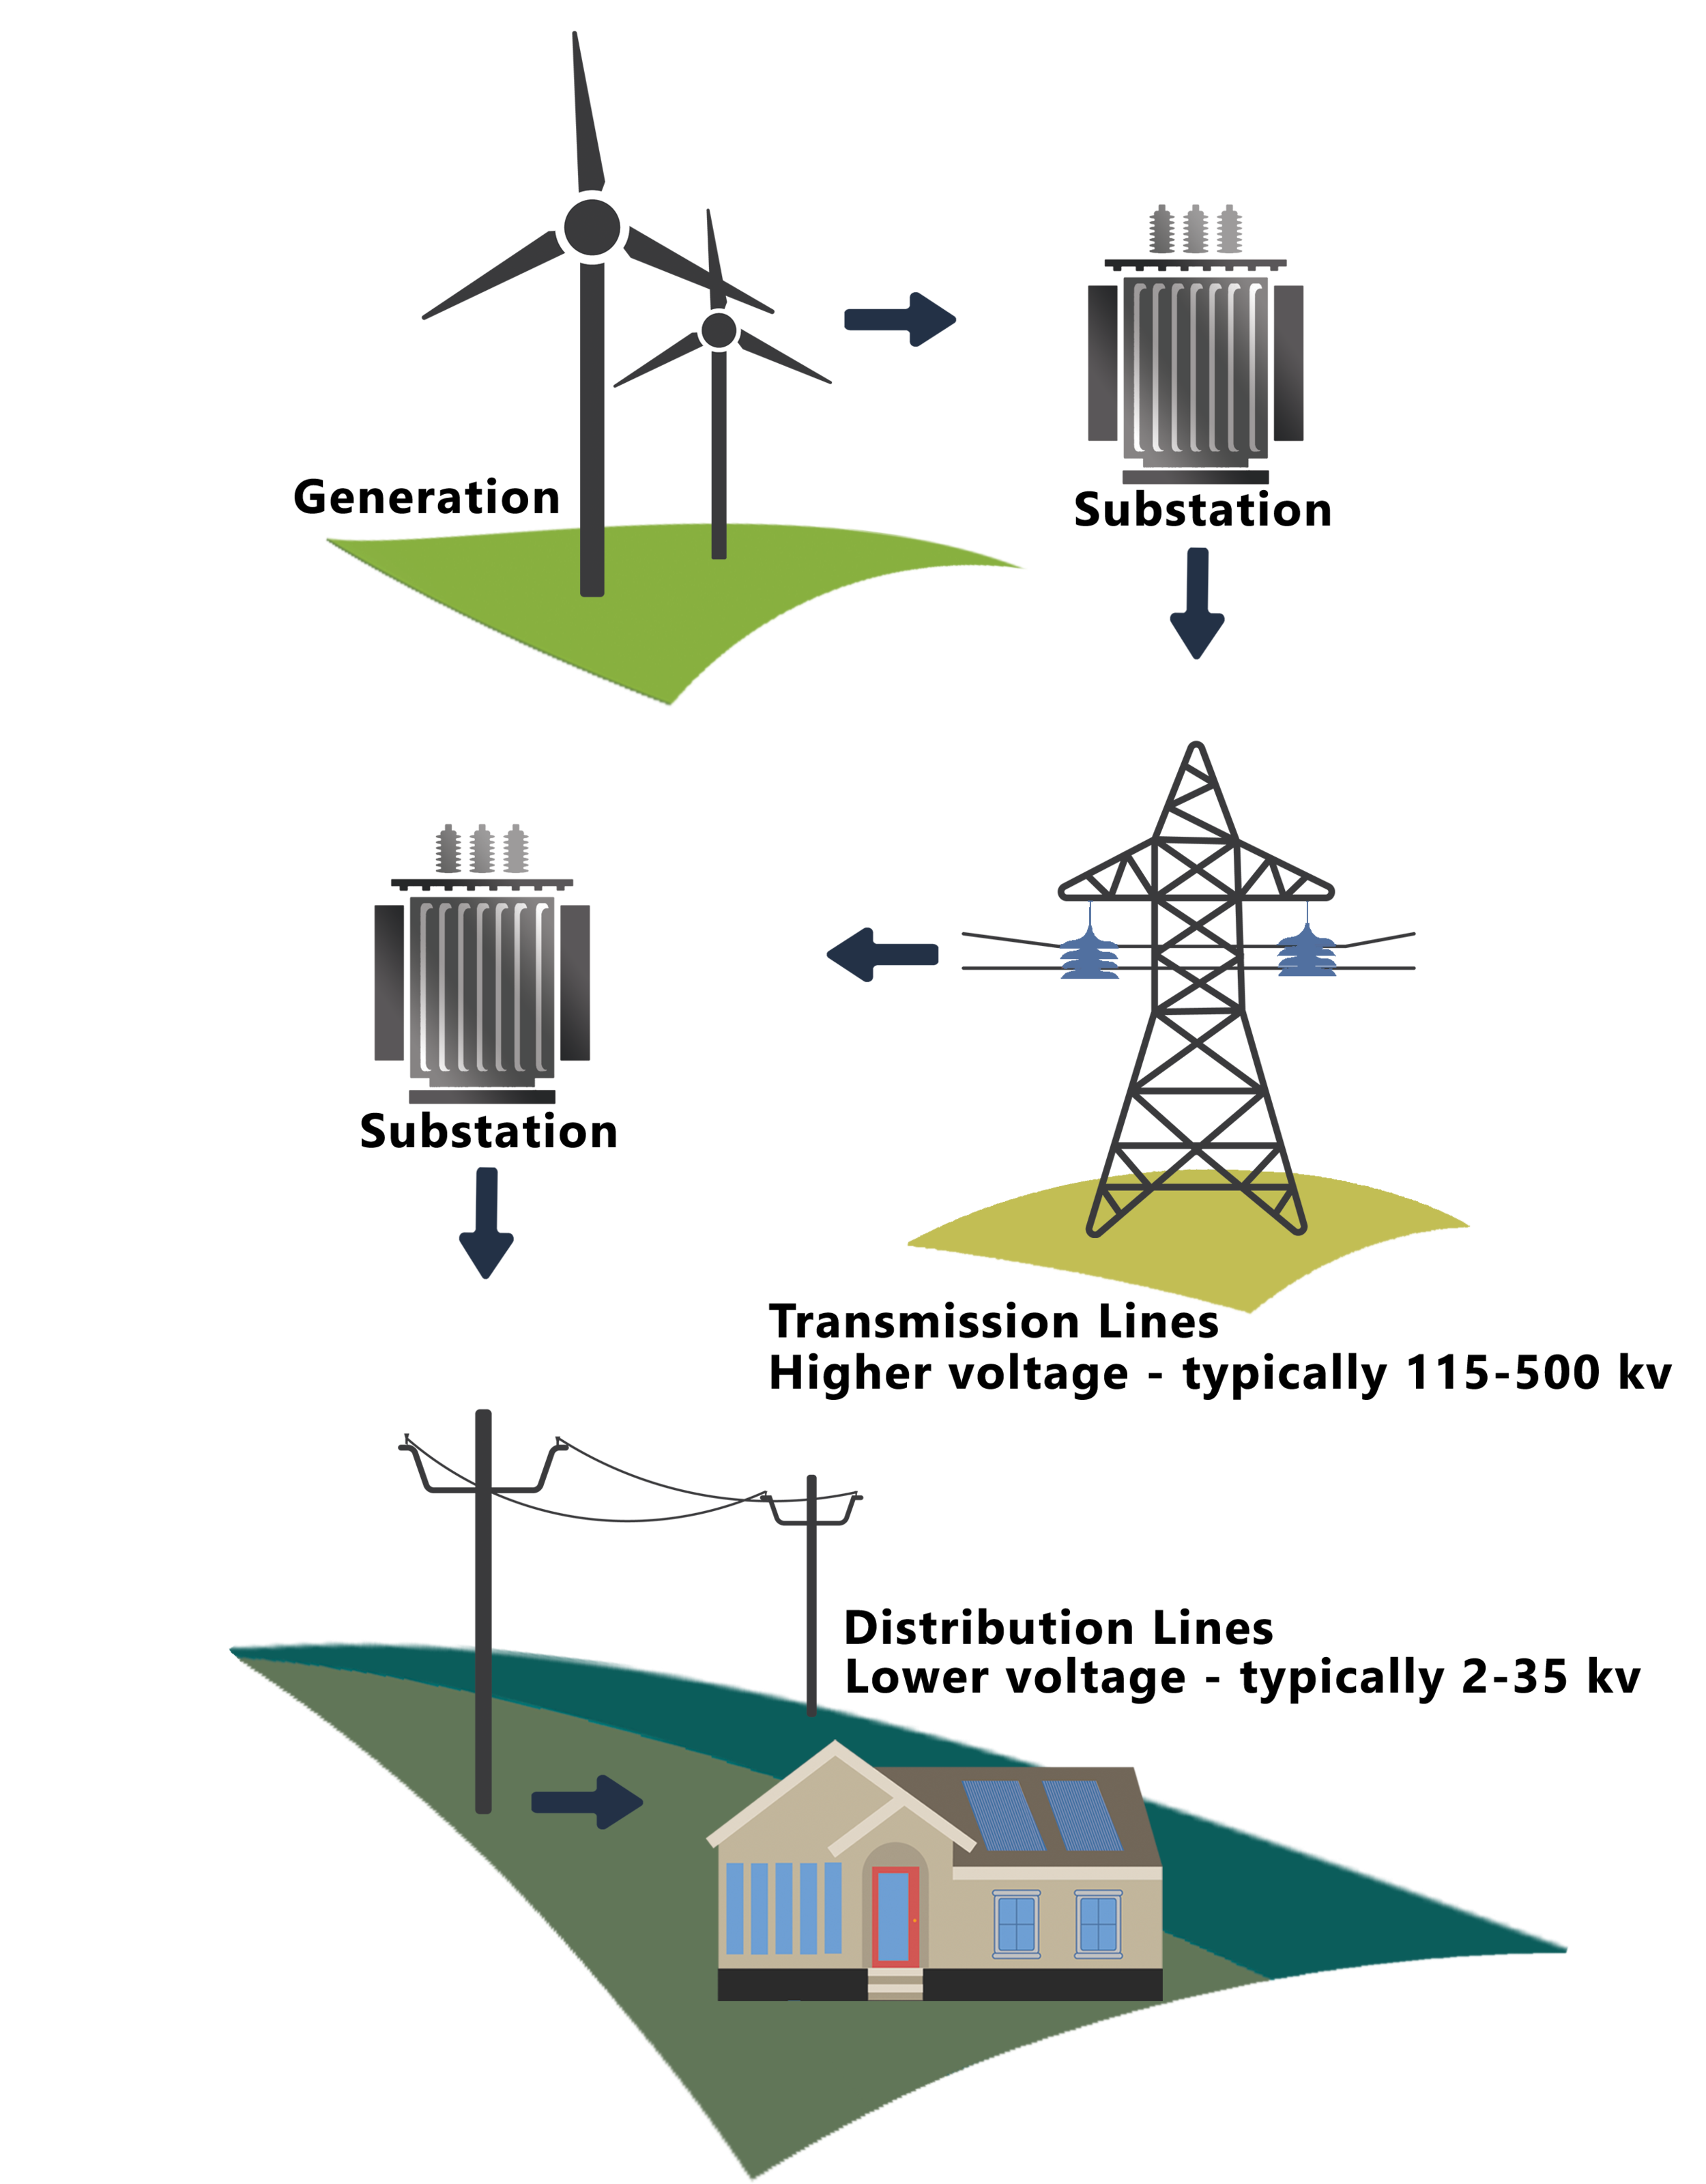 Transmission And Distribution 2020 — Energy Info